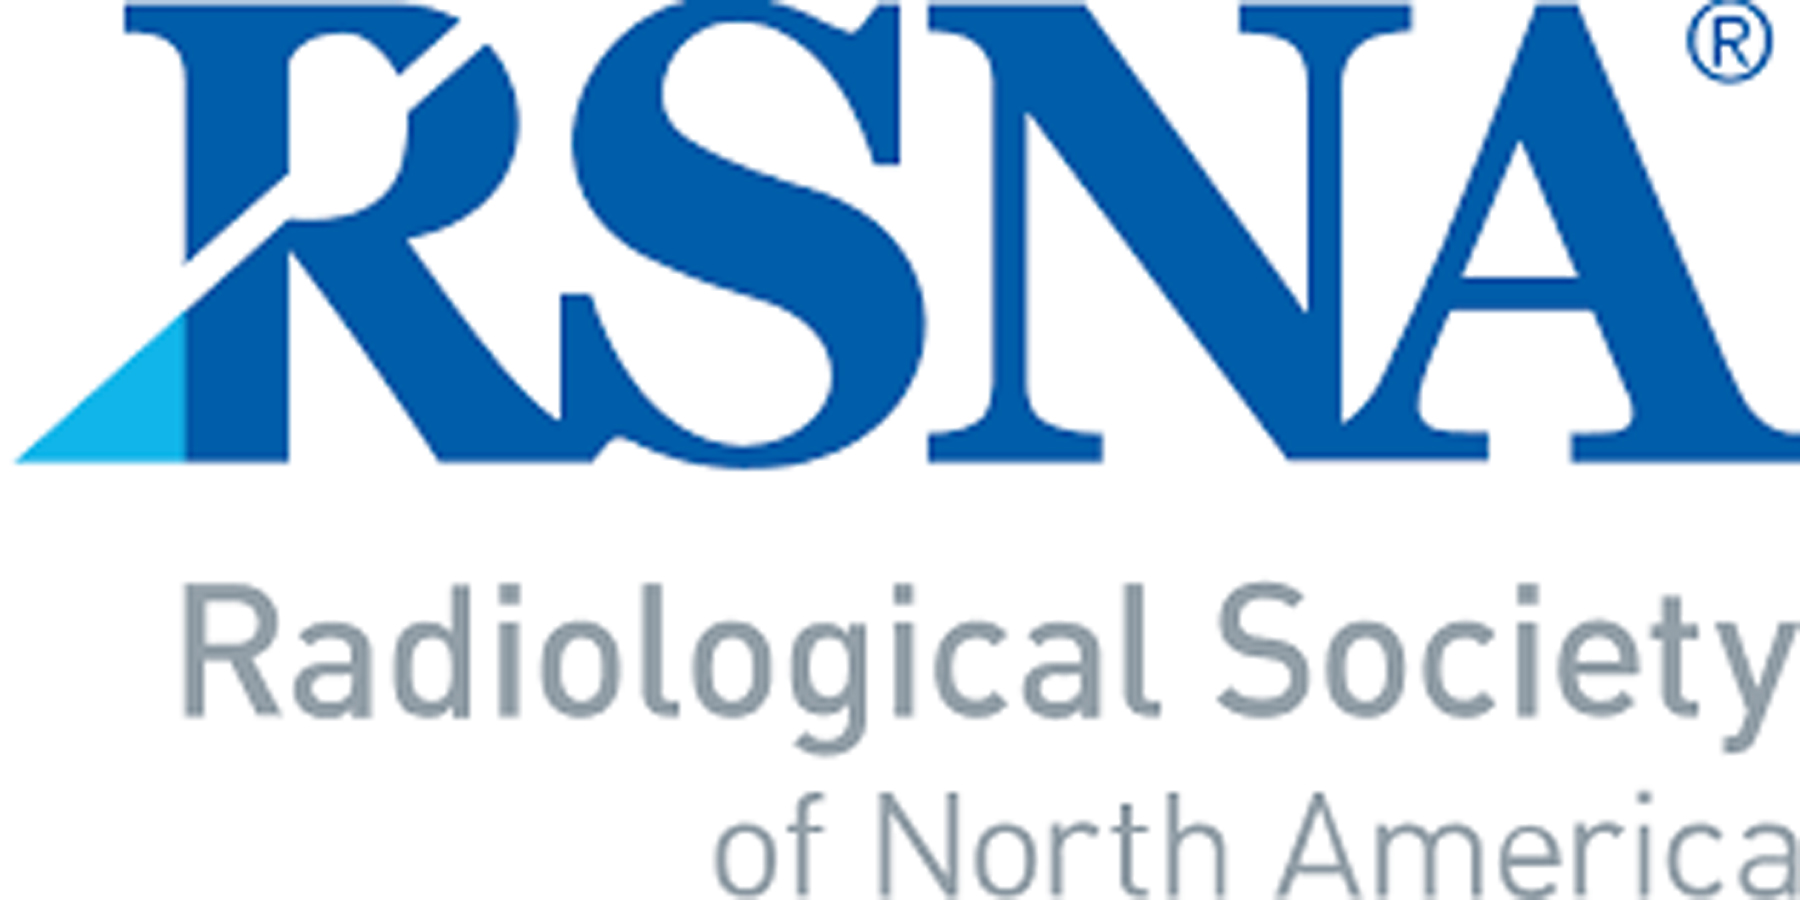 RSNA 2020 - 106. Annual Meeting / Radiological Society of North America